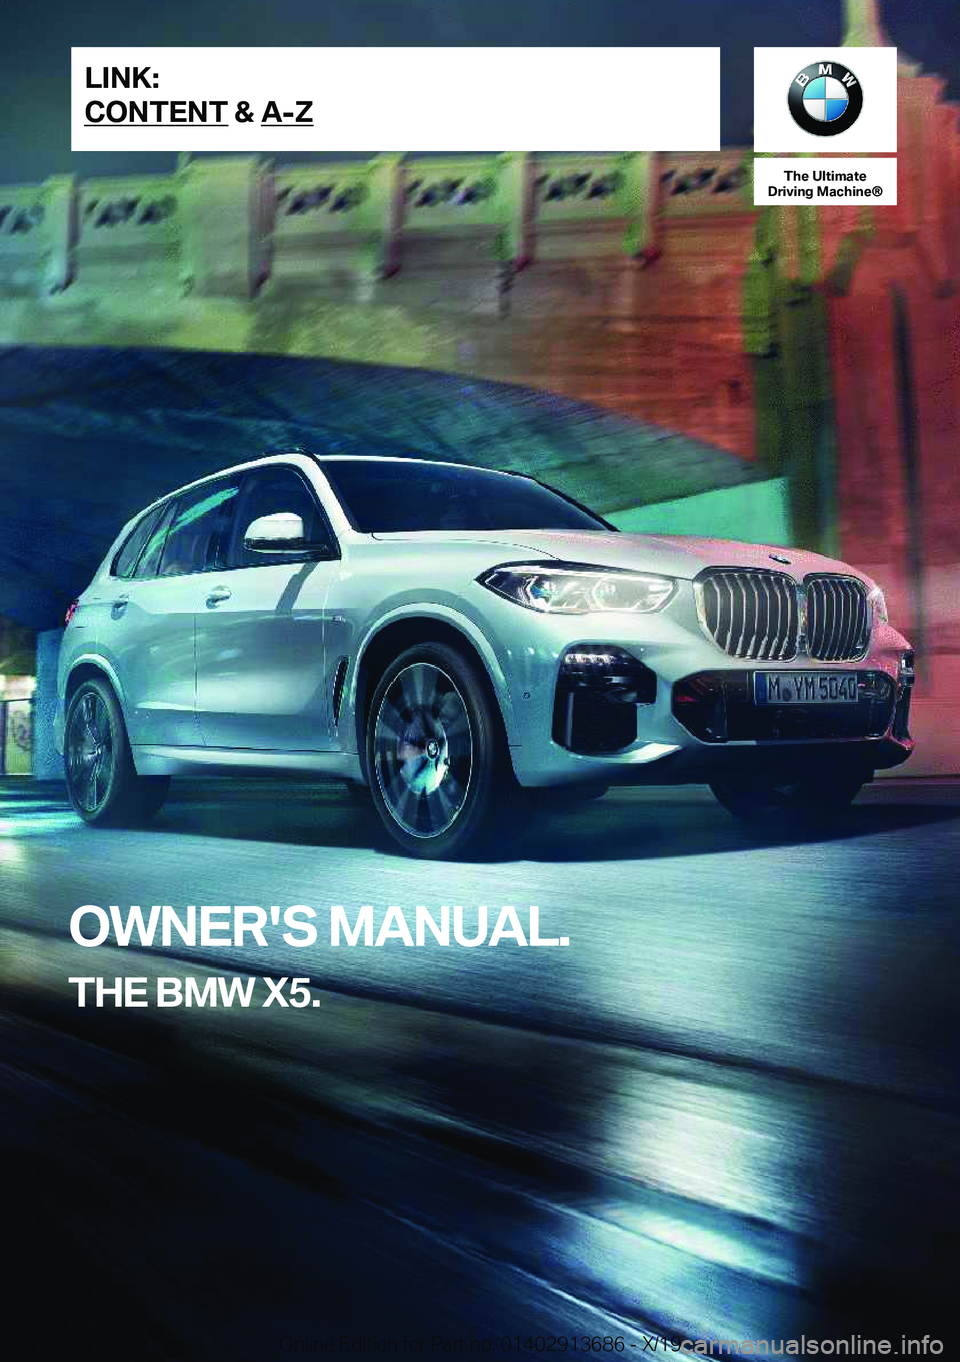 BMW X5 2020  Owners Manual �T�h�e��U�l�t�i�m�a�t�e
�D�r�i�v�i�n�g��M�a�c�h�i�n�e�n
�O�W�N�E�R�'�S��M�A�N�U�A�L�.
�T�H�E��B�M�W��X�5�.�L�I�N�K�:
�C�O�N�T�E�N�T��&��A�-�Z�O�n�l�i�n�e��E�d�i�t�i�o�n��f�o�r��P�a�r�t�